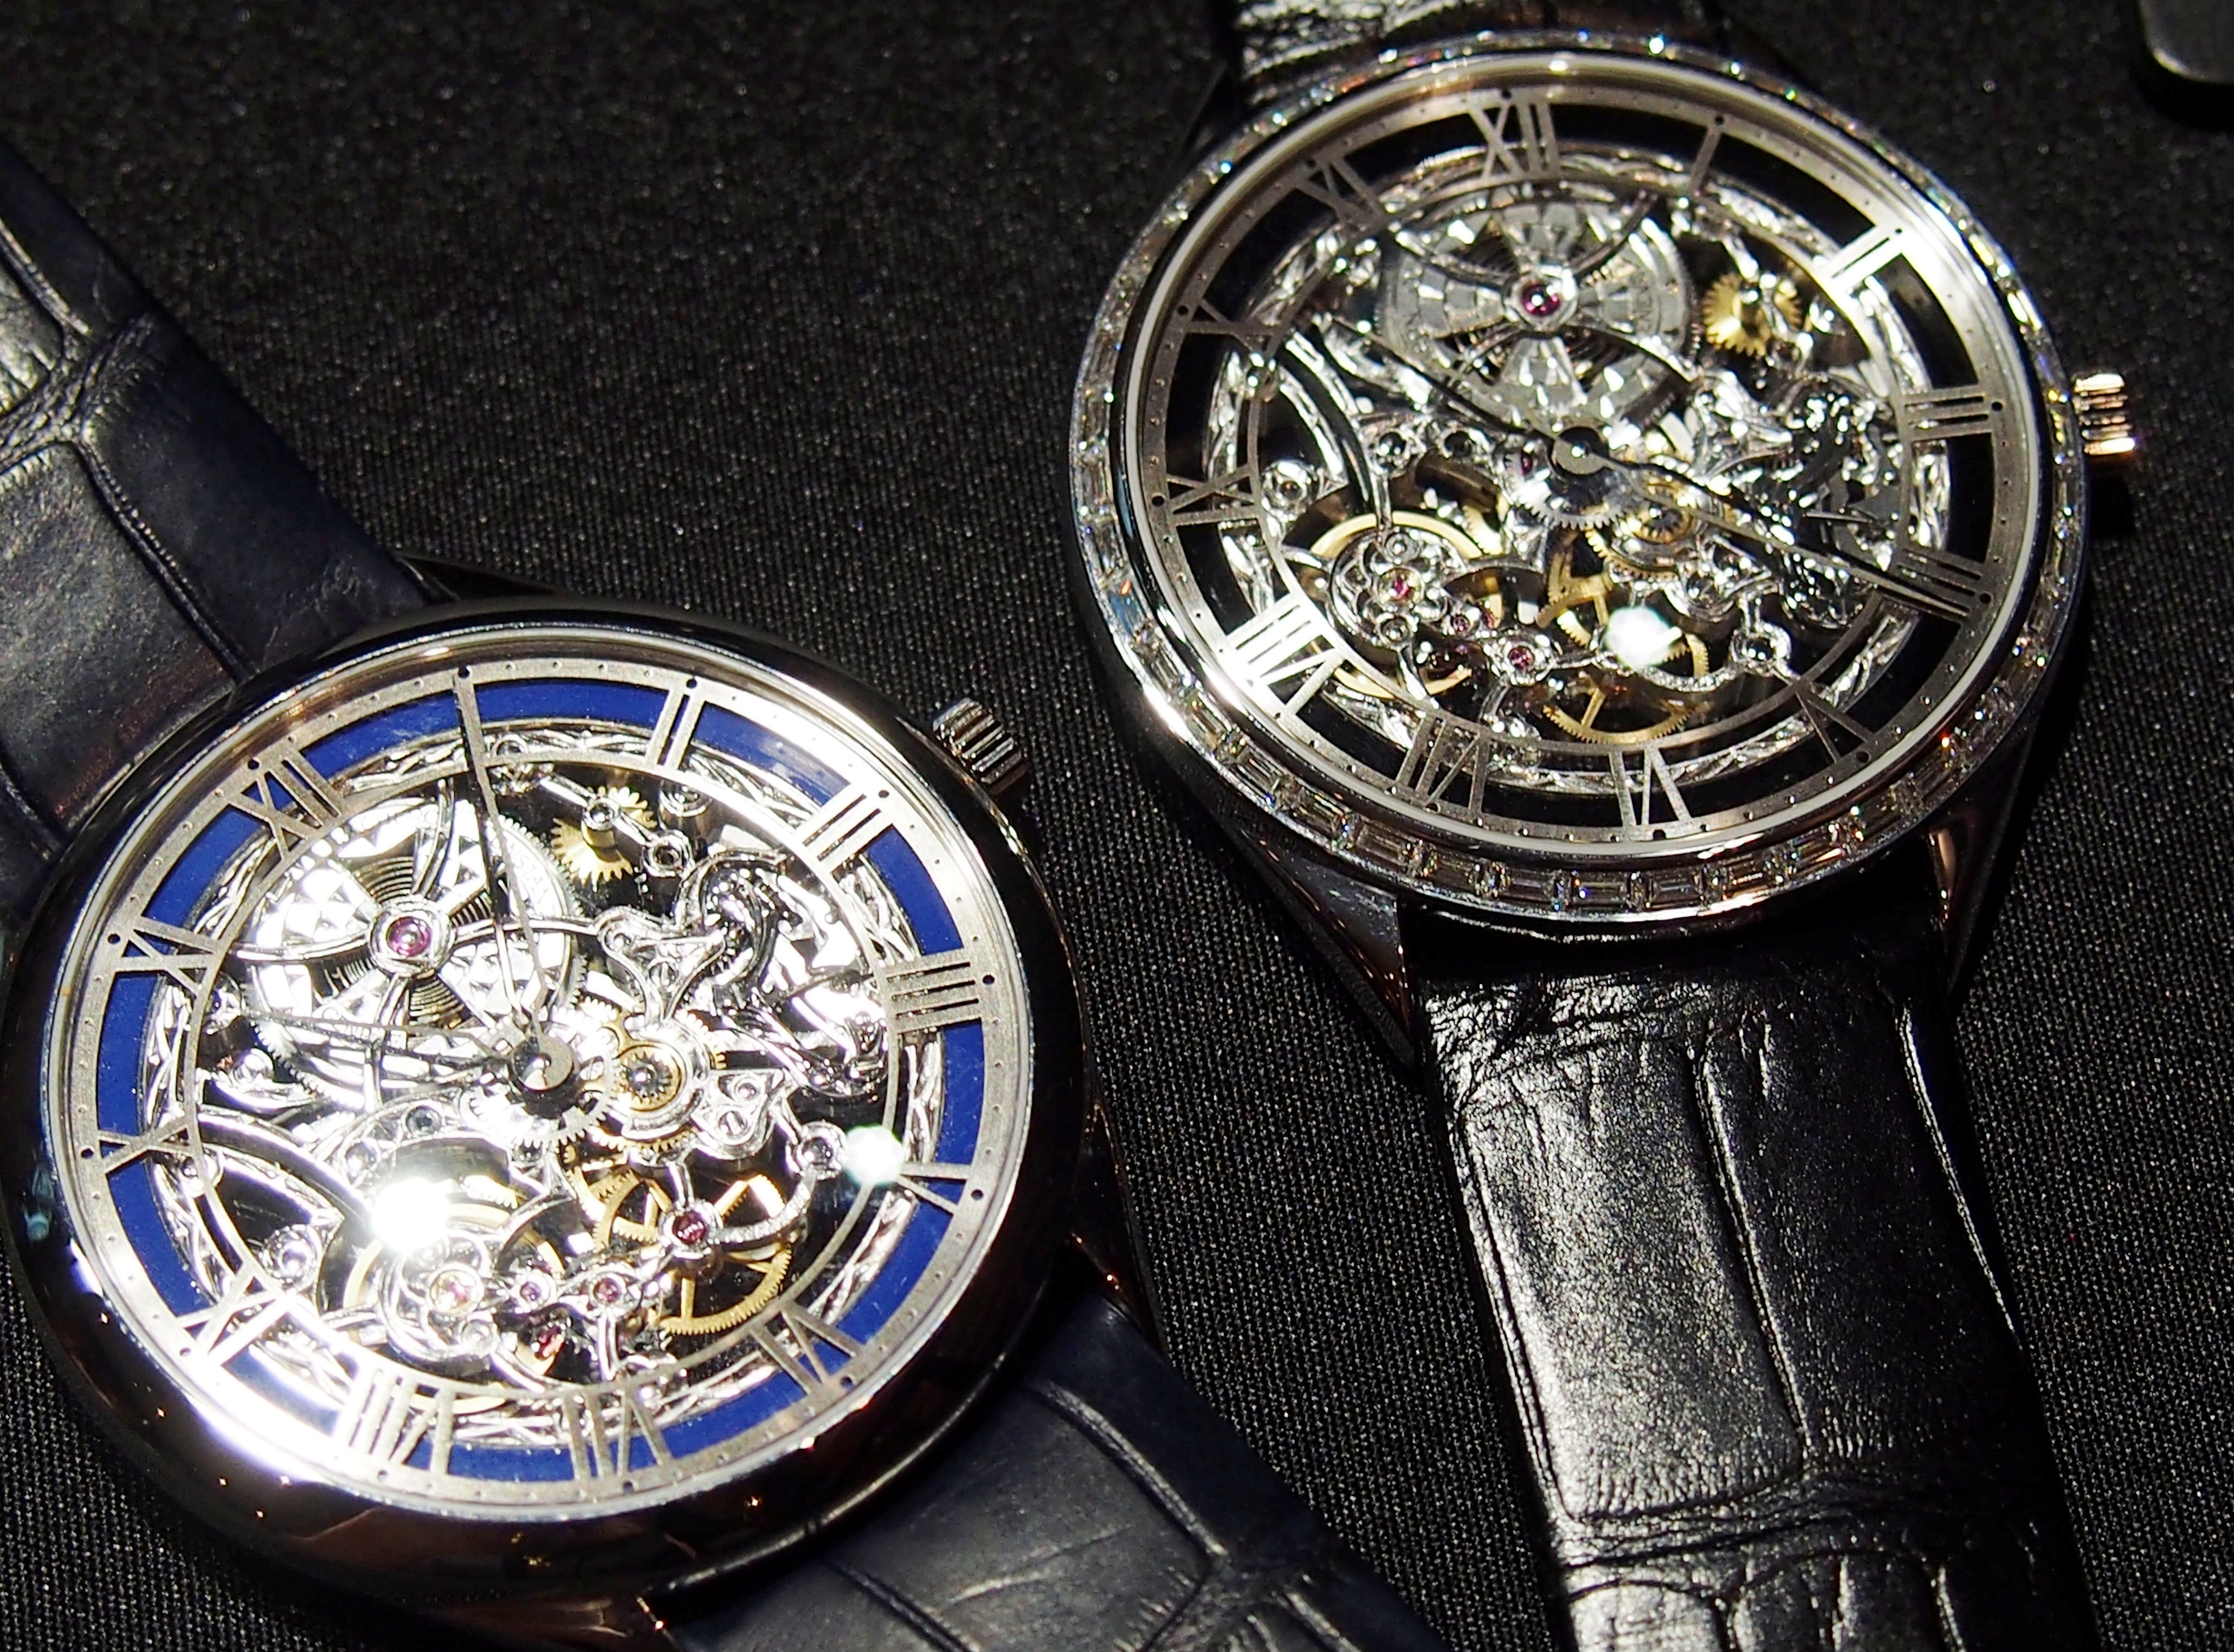 The new skeletonized watches feature blue, gray or black Grand Feu enamel inner rings. 